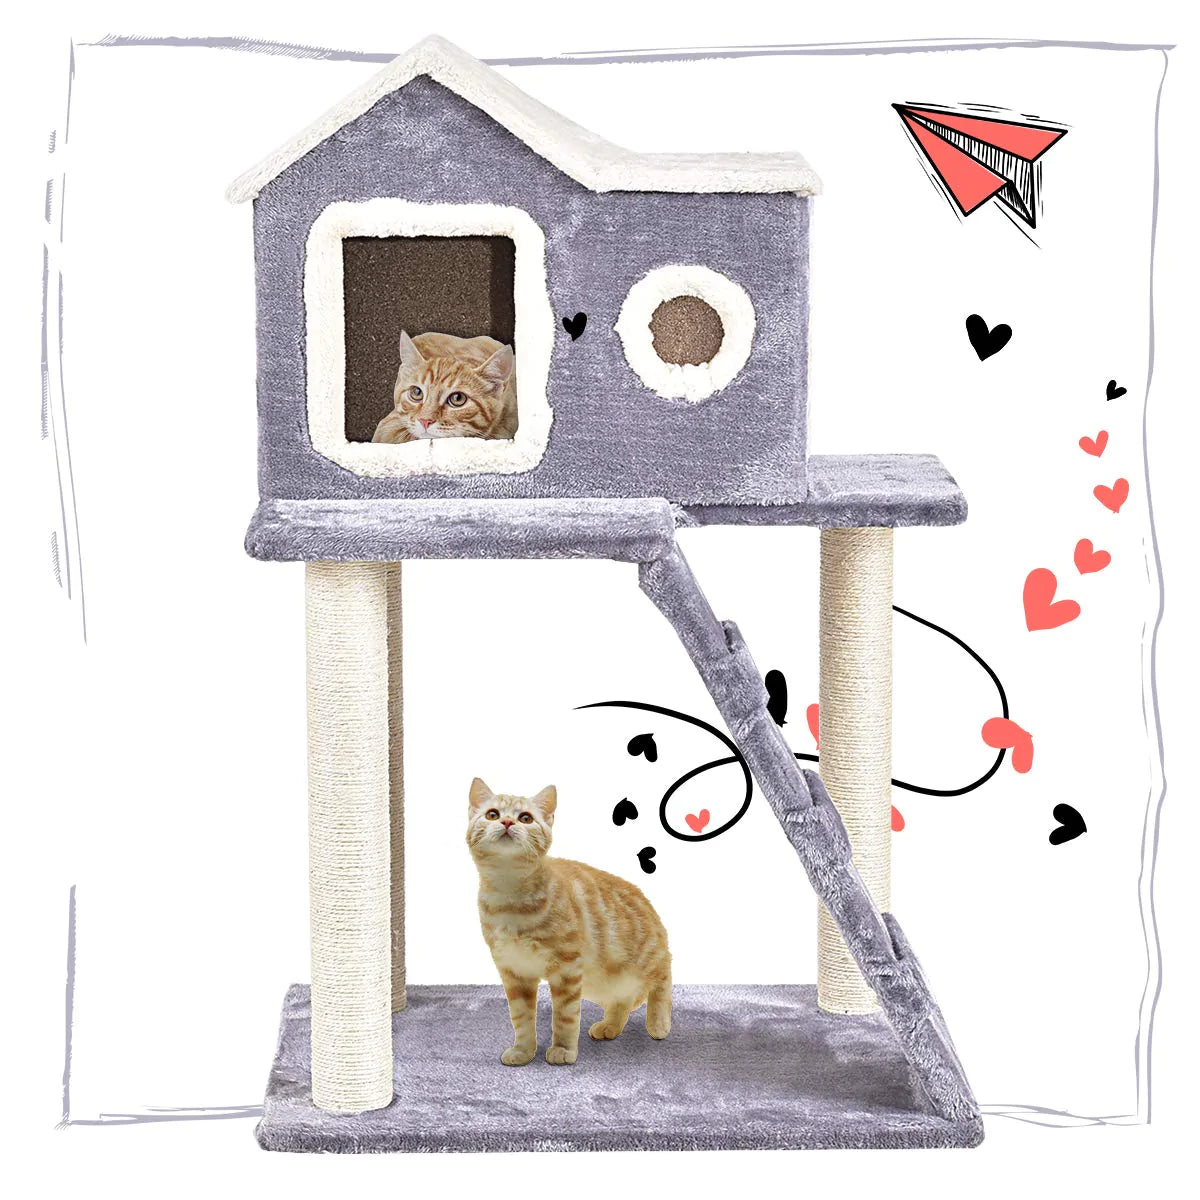 Tips When Choosing Cat Trees for Your Kittens